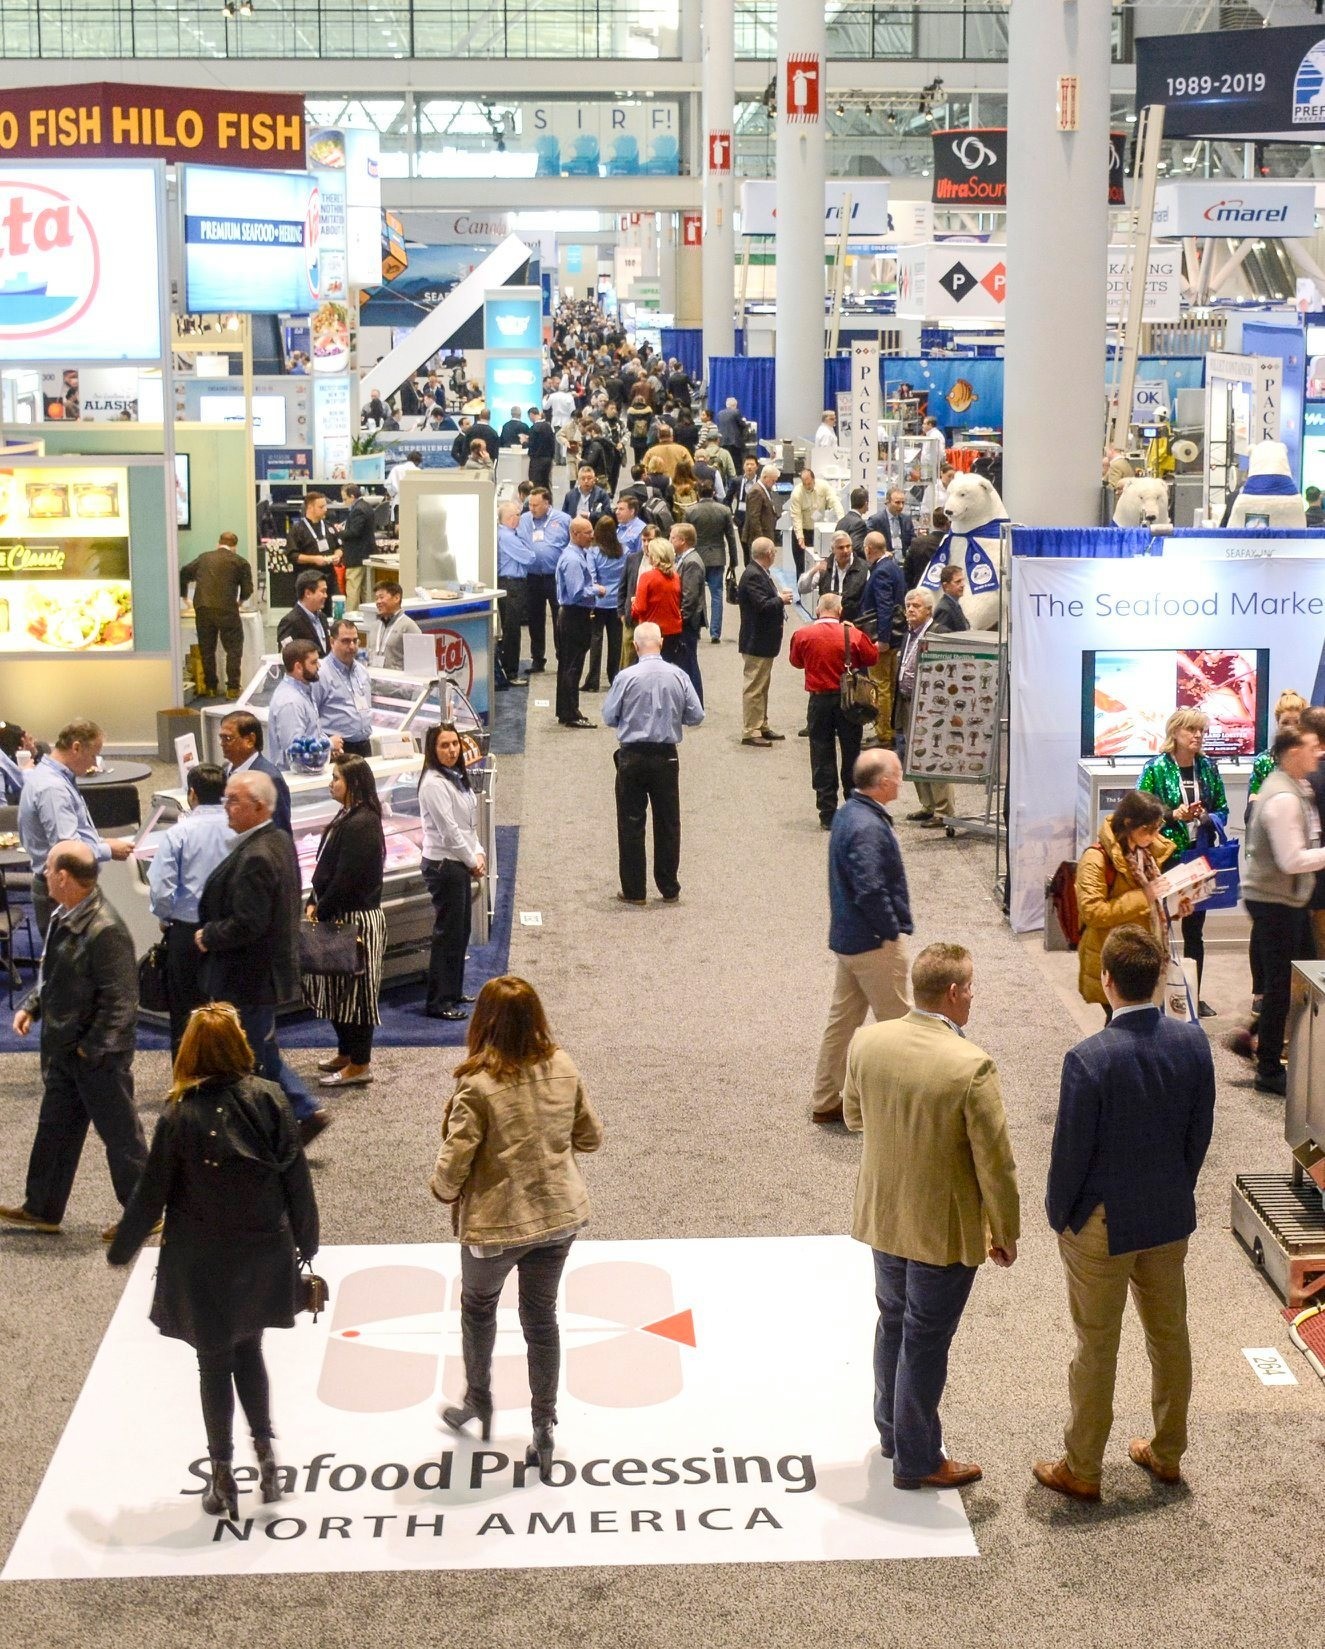 SEAFOOD EXPO NORTH AMERICA/SEAFOOD PROCESSING NORTH AMERICA (Mar 2024